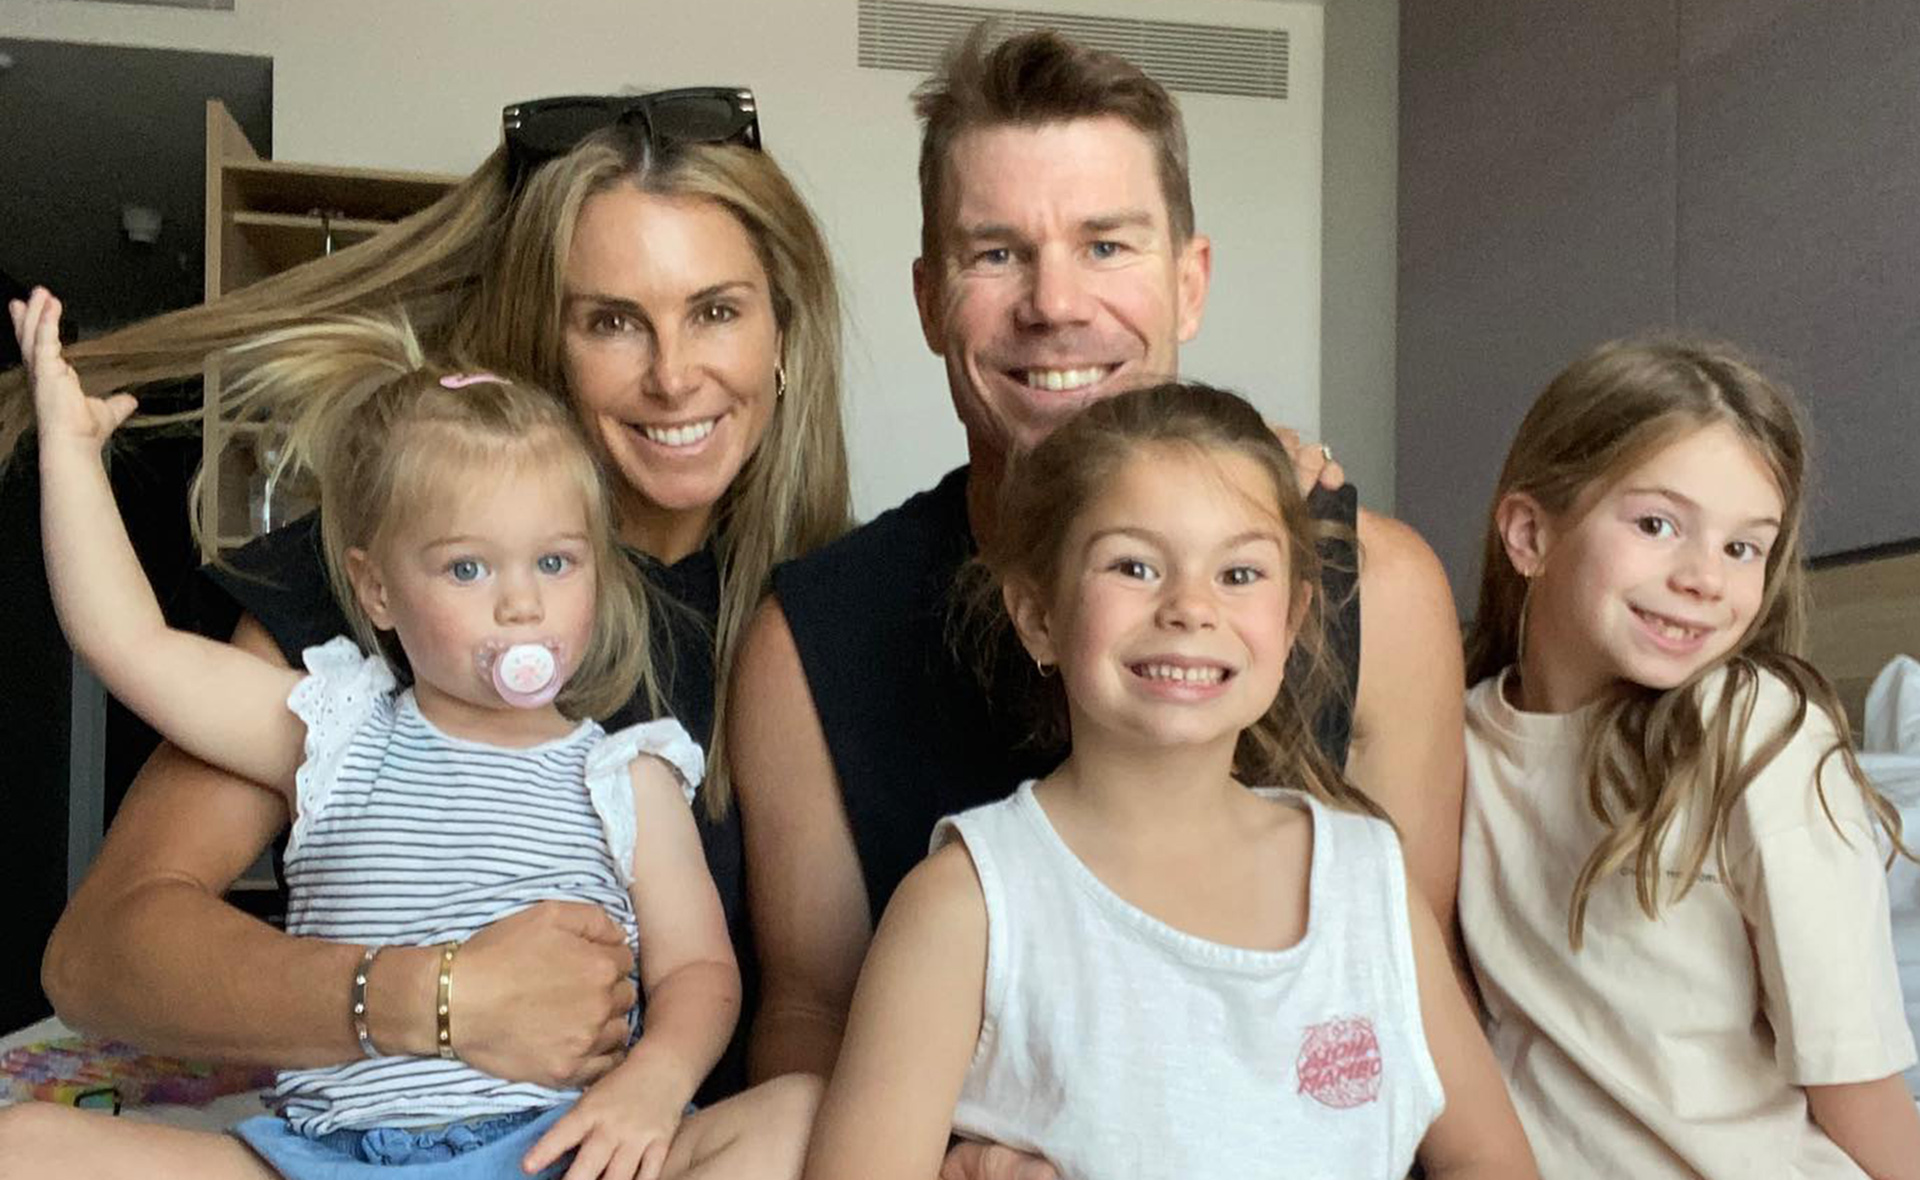 EXCLUSIVE: Why Candice Warner would be embarrassed to wear this $300 item to pick up her three daughters from school